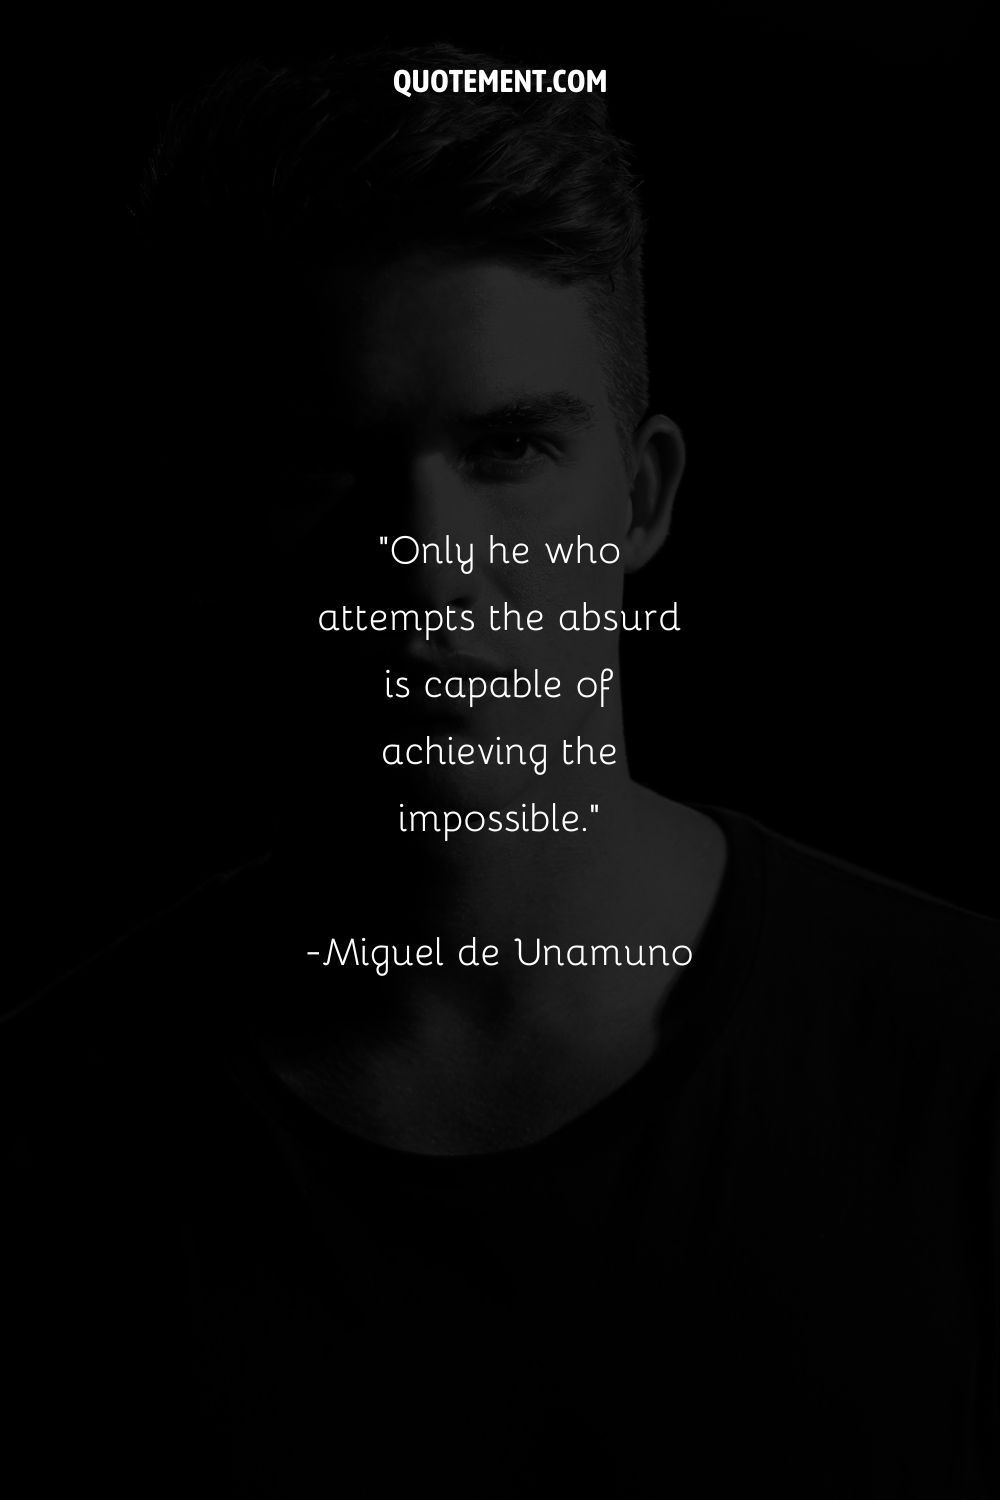 image of a young man representing uplifting quote for men